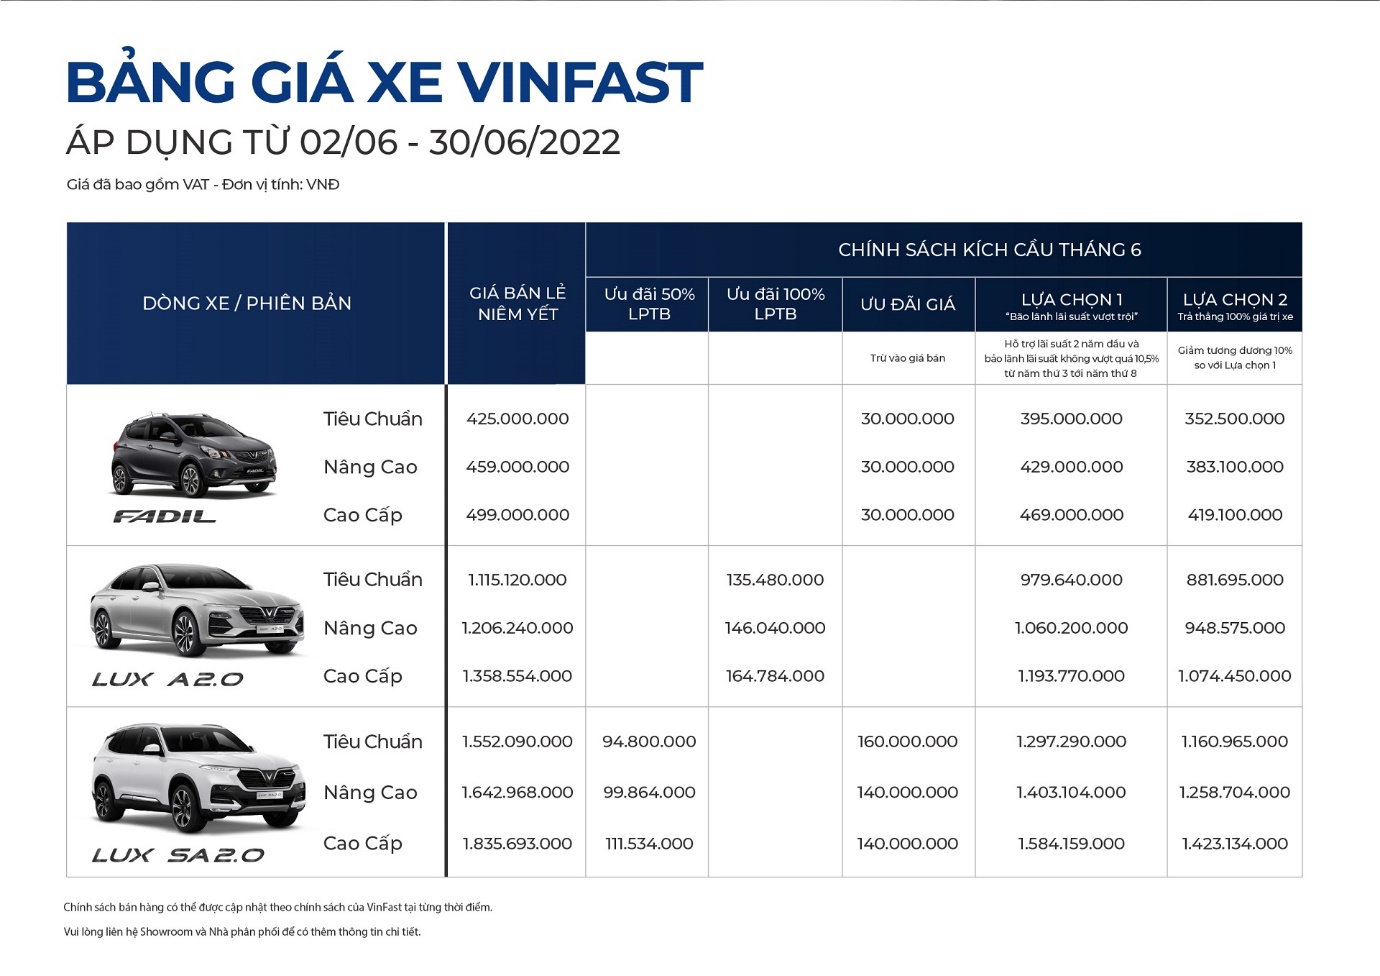 Registration fee for stopping incentives, buying a car has been taken care of by VinFast - Photo 1.